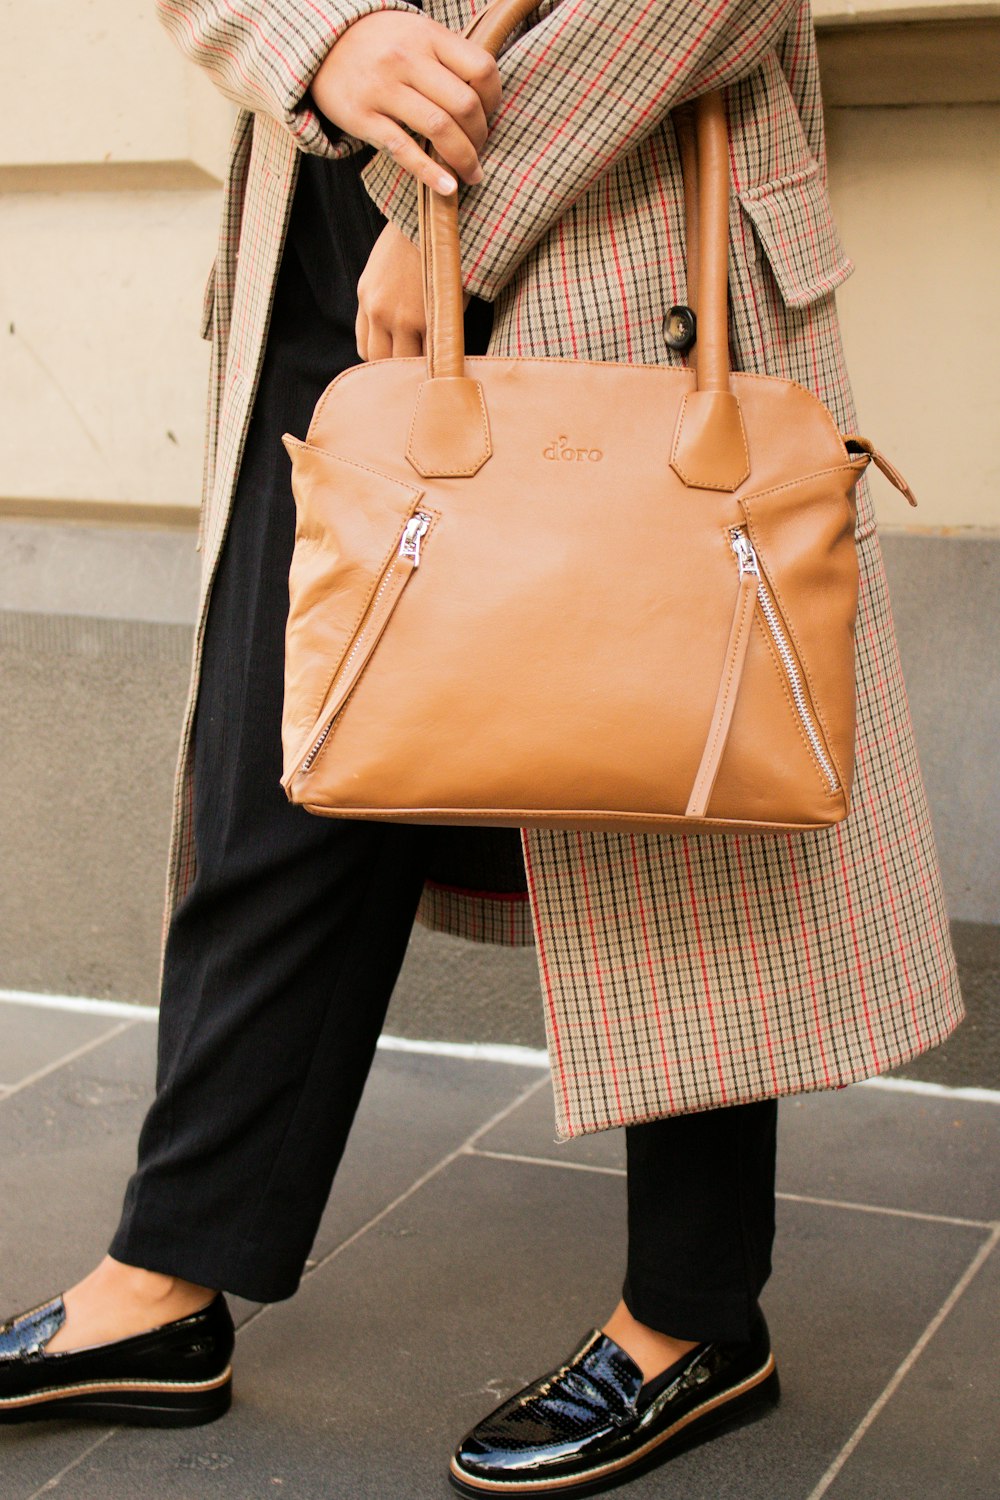 person in black pants holding brown leather handbag